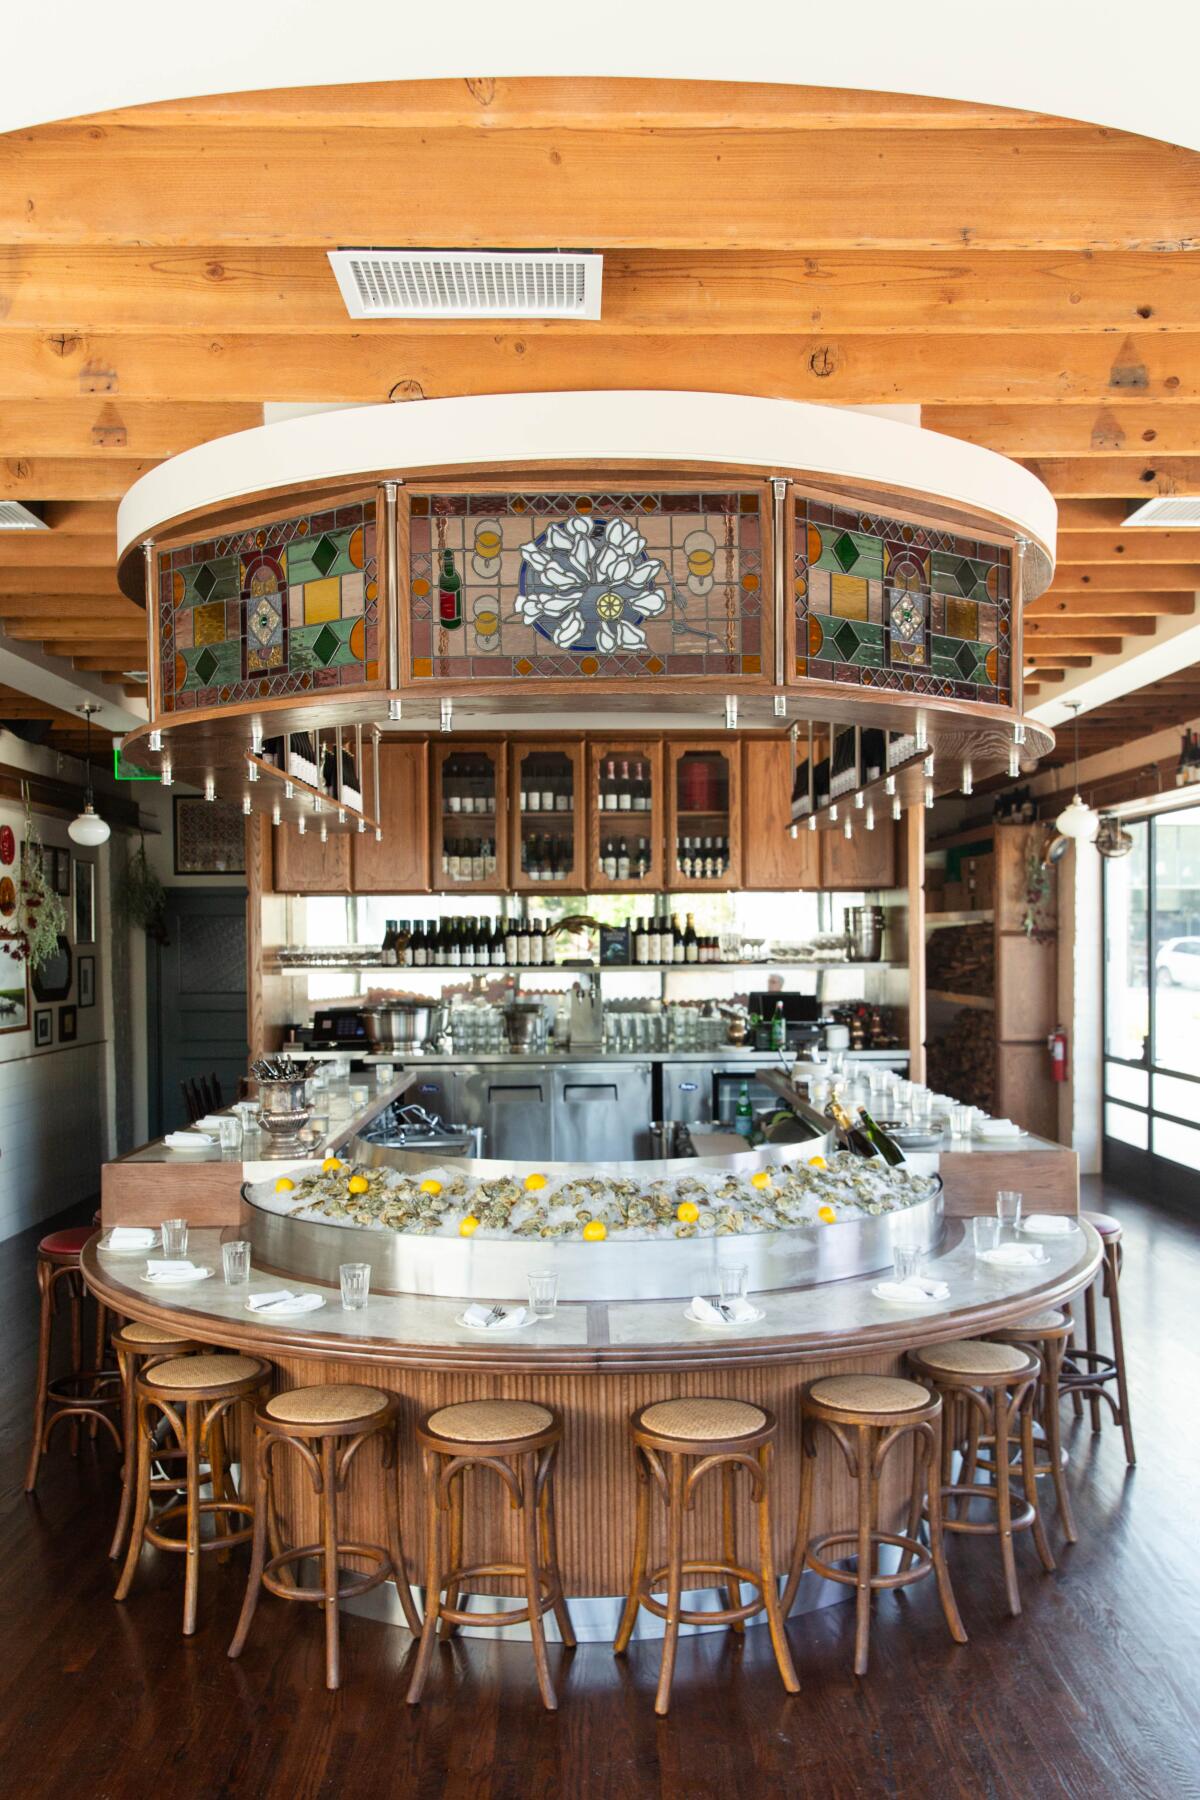 A semi-circular bar with barstools at Queen Street restaurant in Eagle Rock